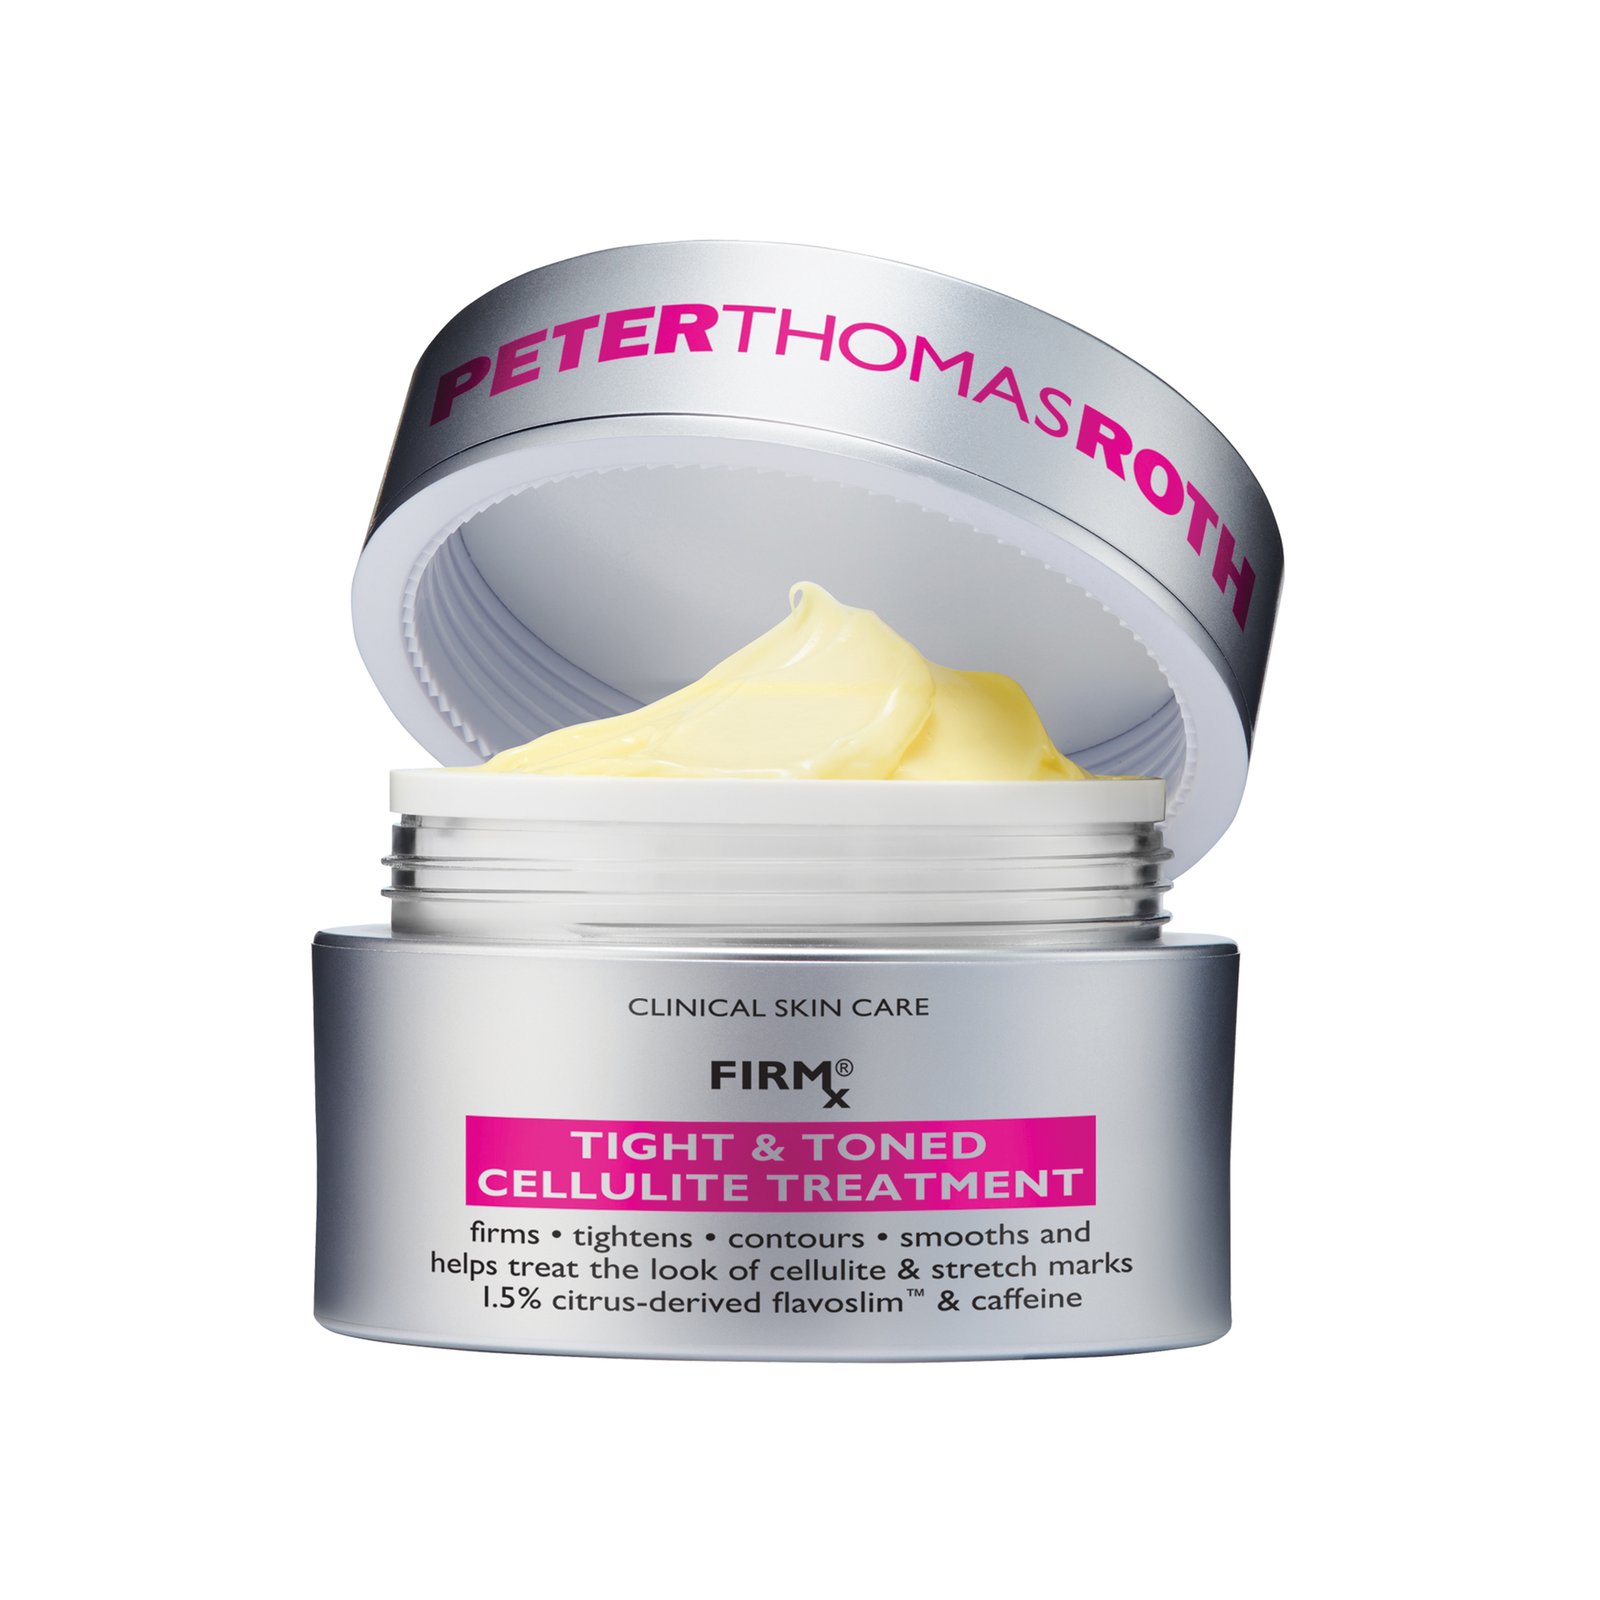 Peter Thomas Roth FIRMx® Tight & Toned Cellulite Treatment 100 ml